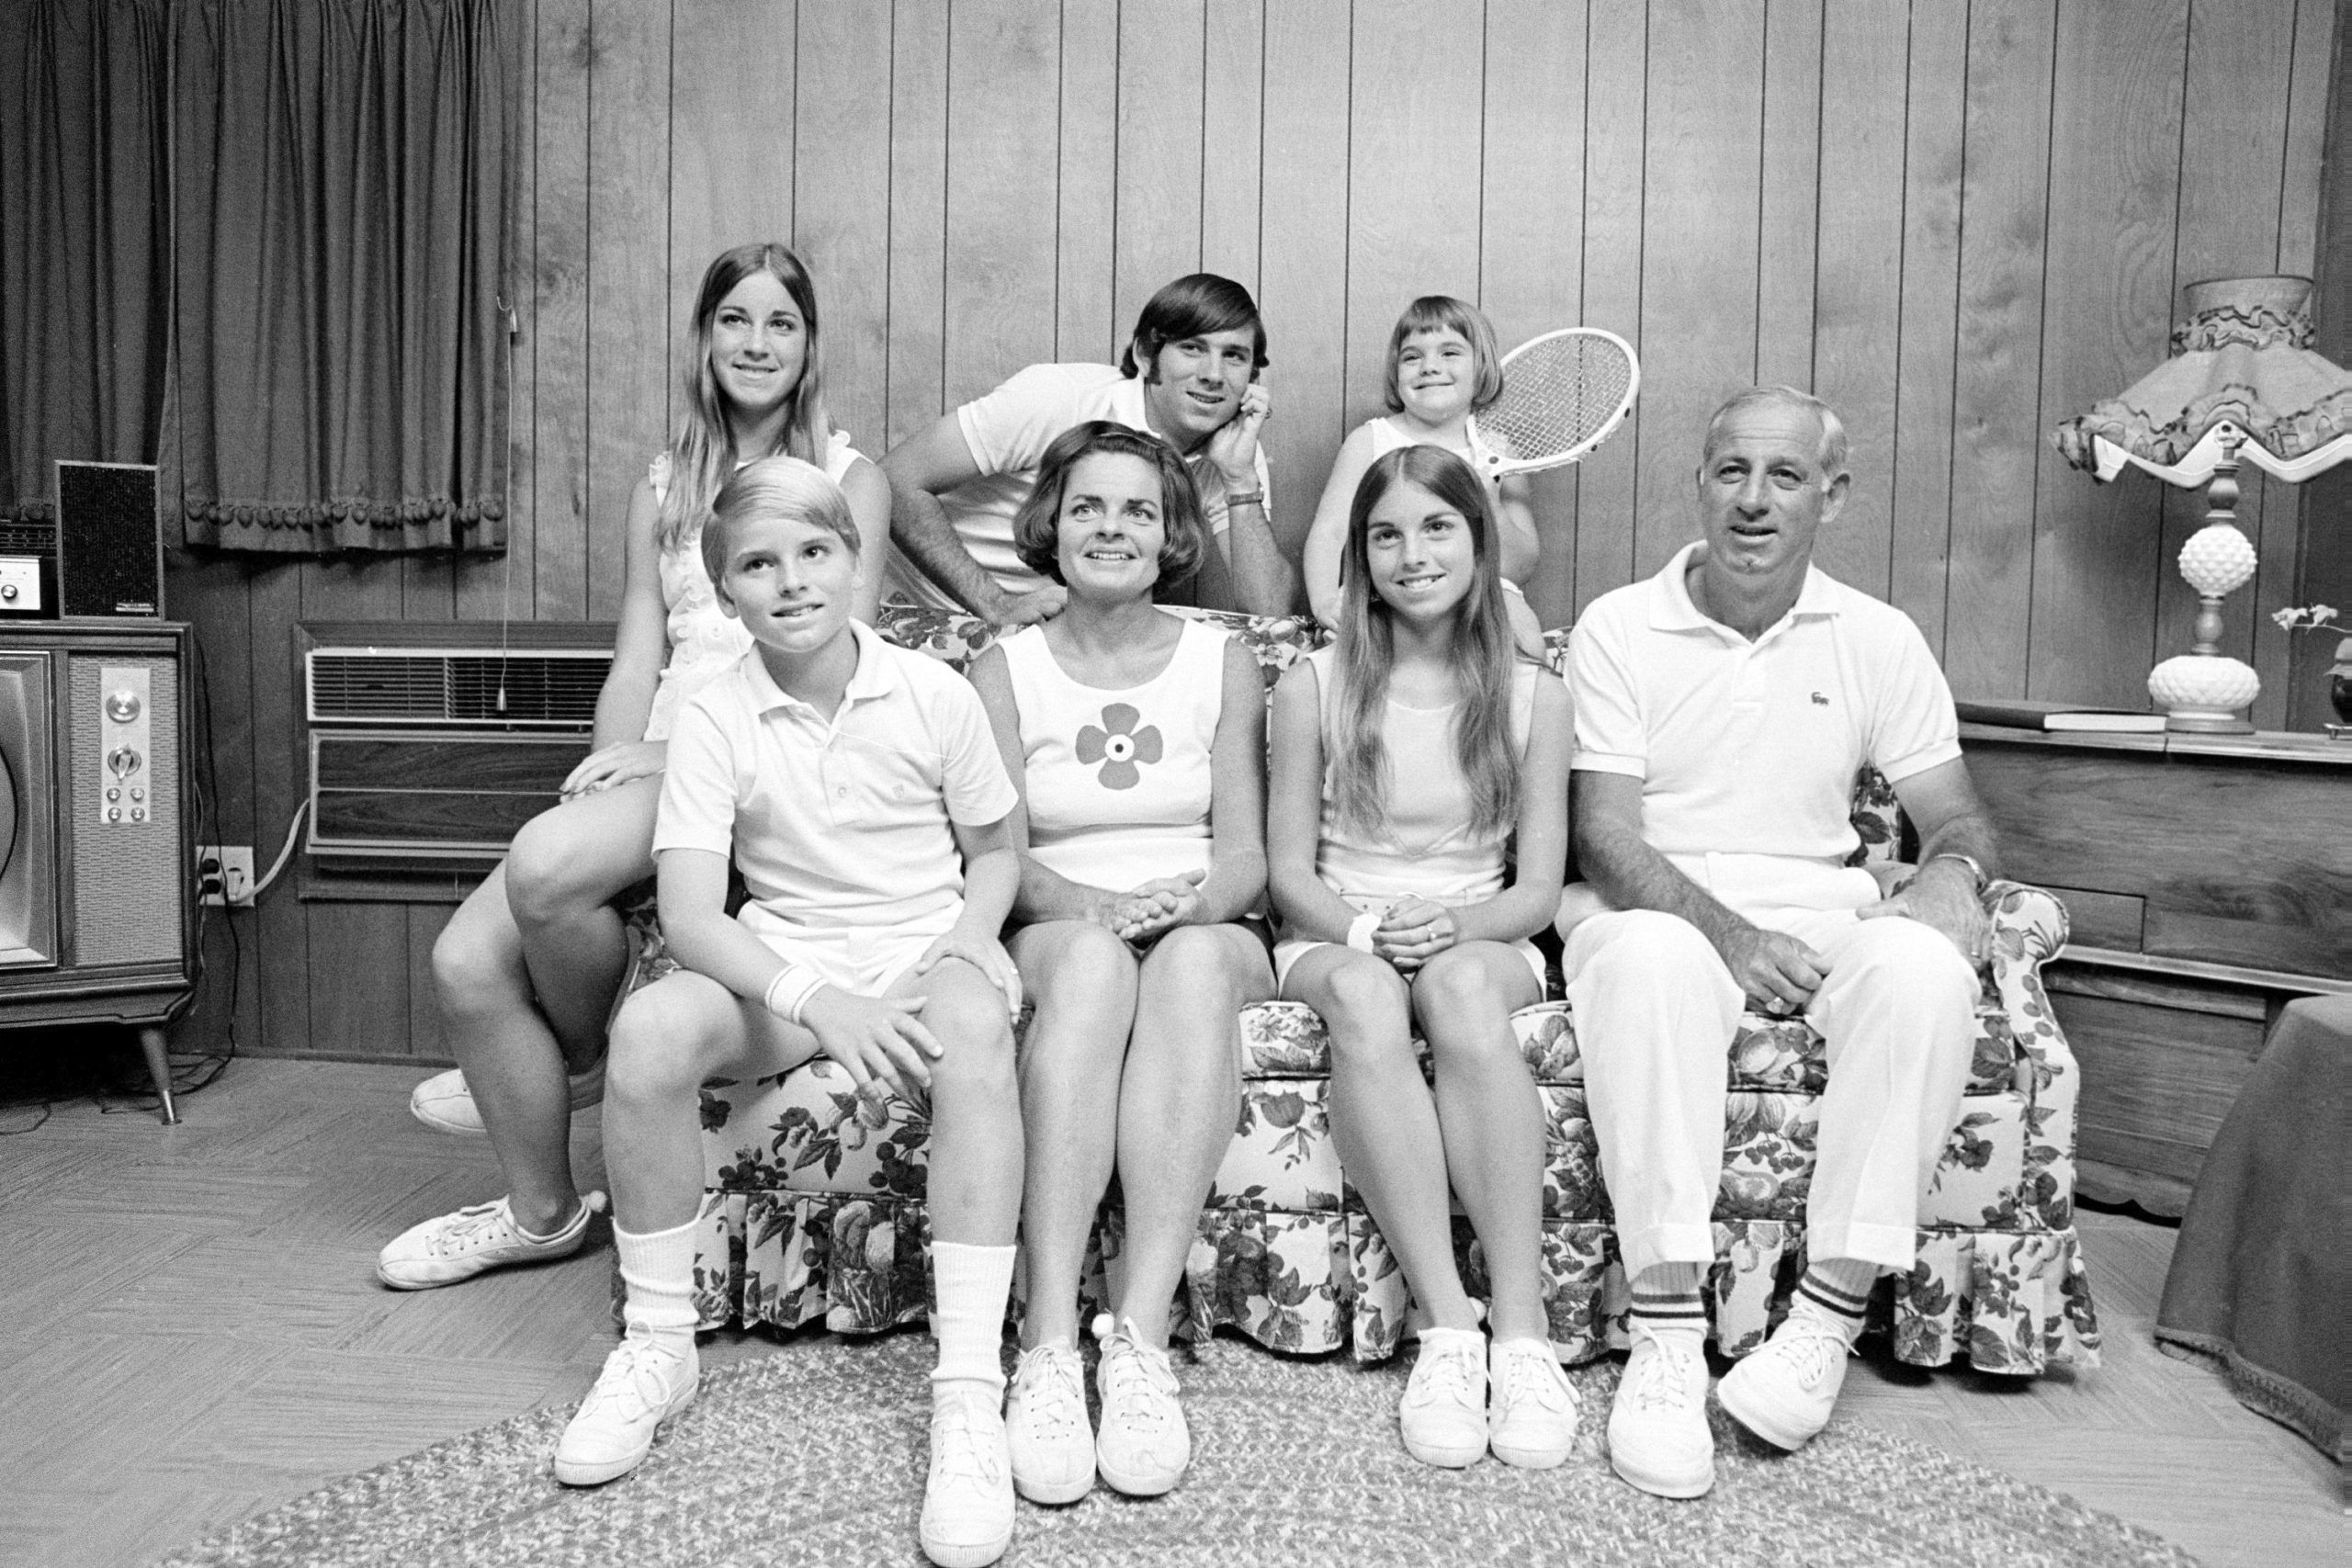 FILE - In this Feb. 13, 1972, file photo, members of the Evert family are shown in their home in Fort Lauderdale, Fla. Front row from left are John, 10, mother Colette, Jeanne, 14, and father James. Back from left are Chris, Drew, 18 and Clare, 4. Jeanne Evert Dubin, a former world-ranked professional tennis player and a younger sister of 18-time Grand Slam champion Chris Evert, has died. Evert Dubin died Thursday, Feb. 20, 2020, after a 2 1/2-year struggle with ovarian cancer. She was 62. (AP Photo/File) ORG XMIT: NY150